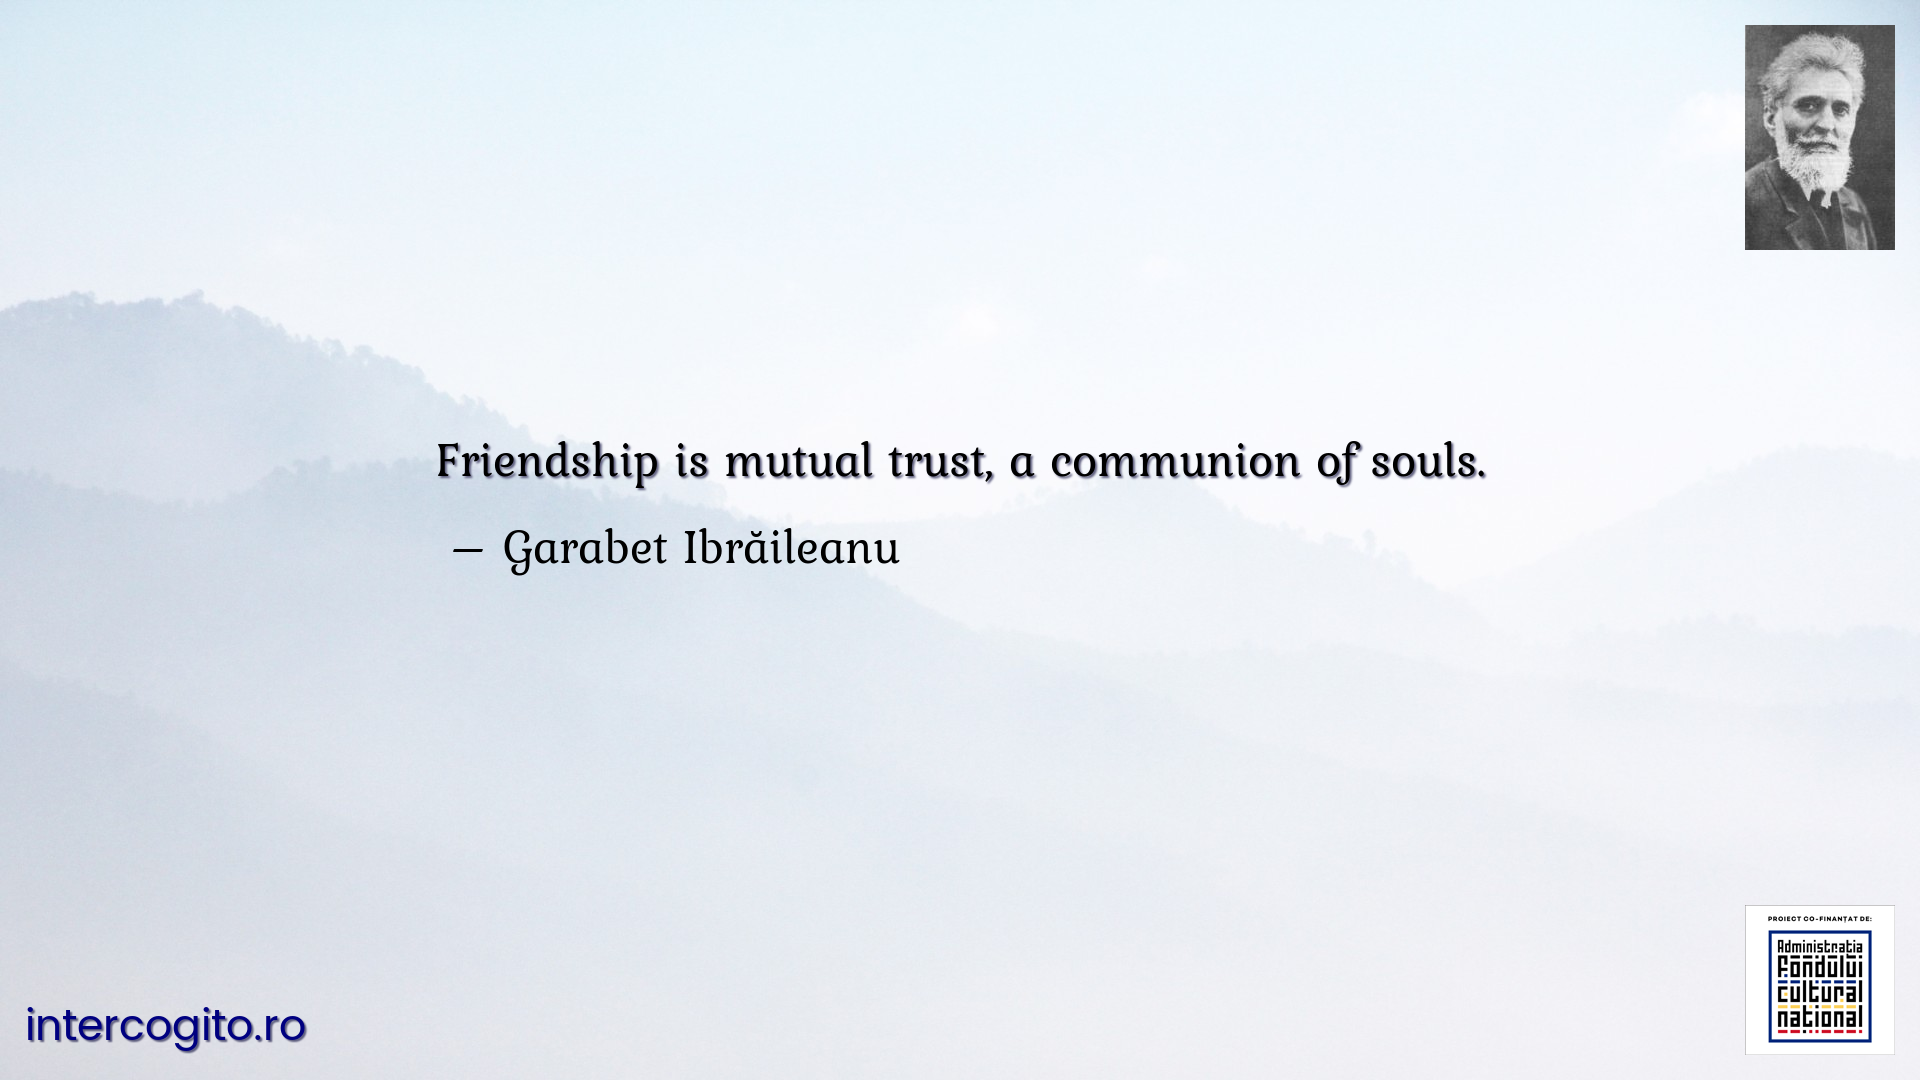 Friendship is mutual trust, a communion of souls.